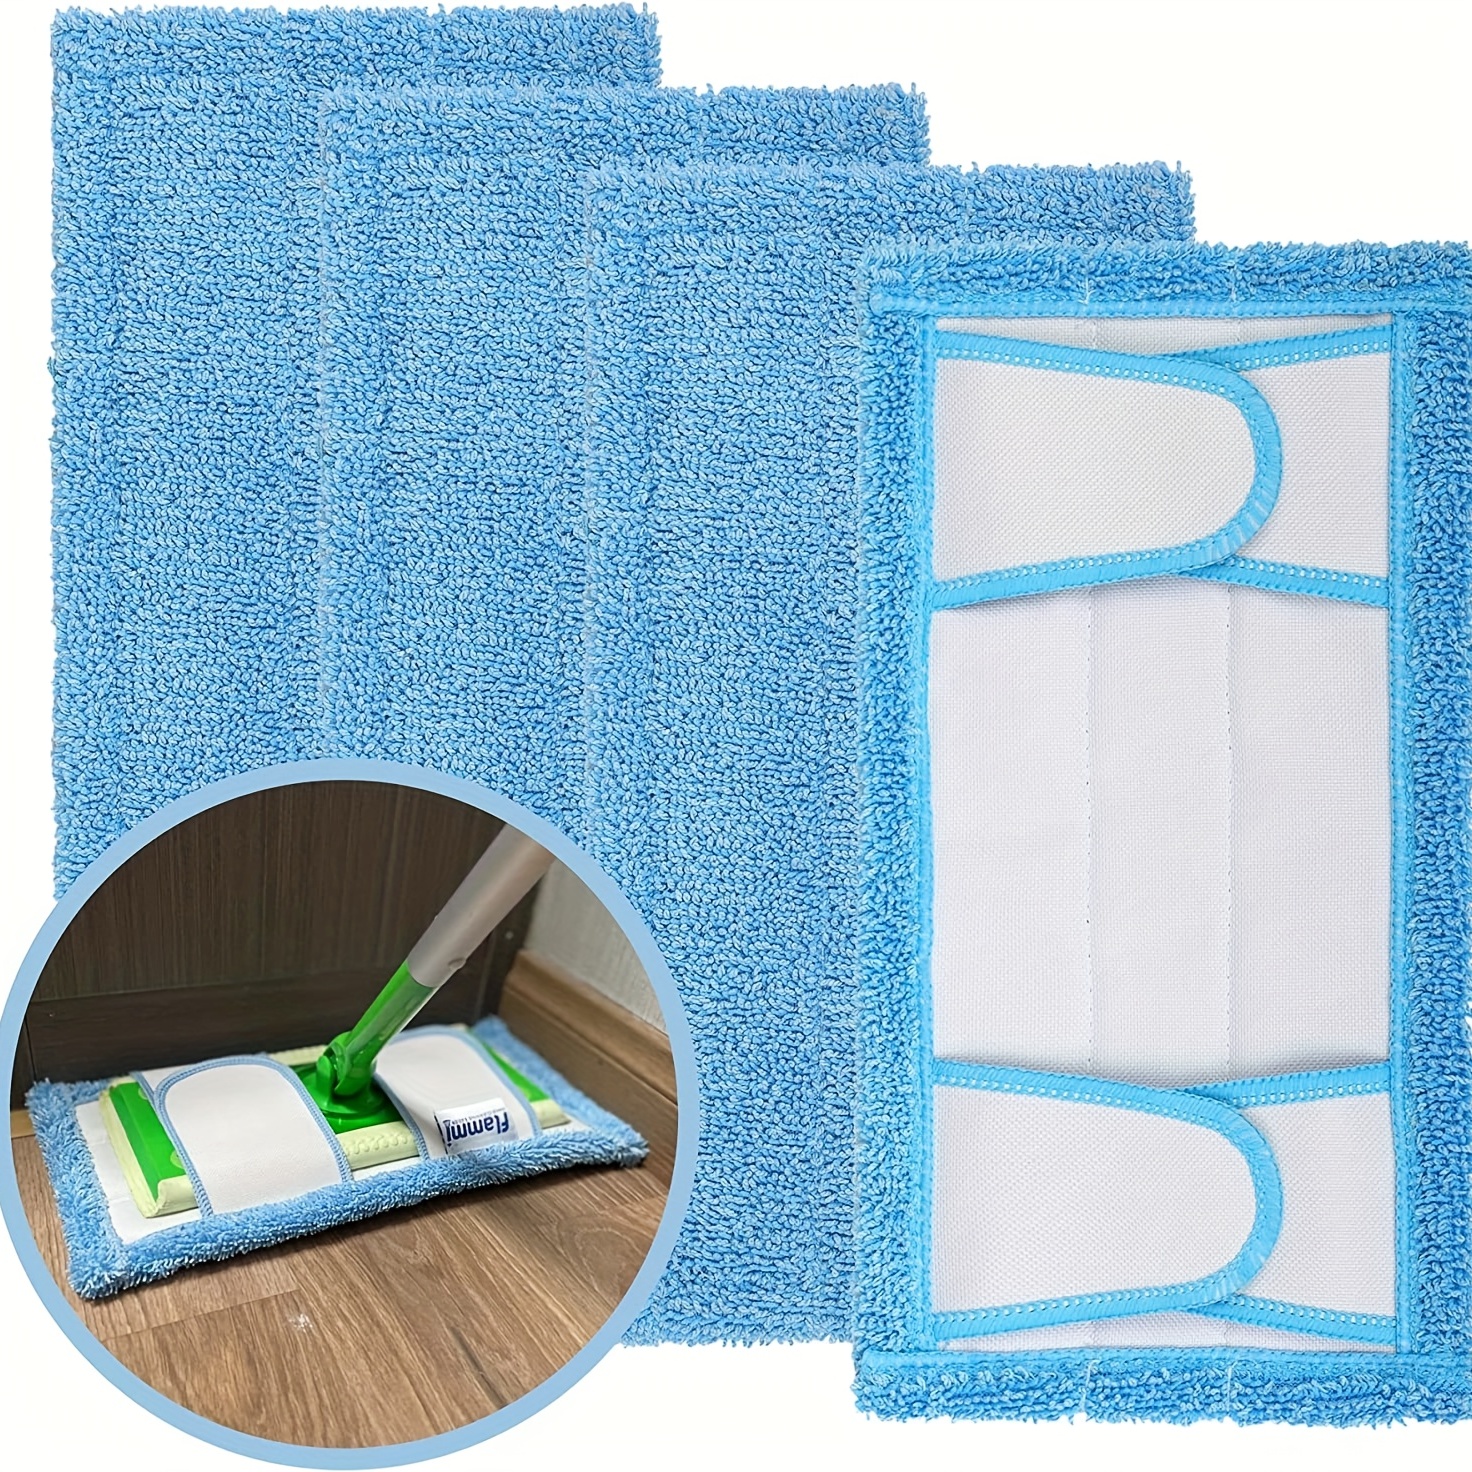 4 Pack Reusable Washable Microfiber Mop Pads Cloth For Swiffer Wet